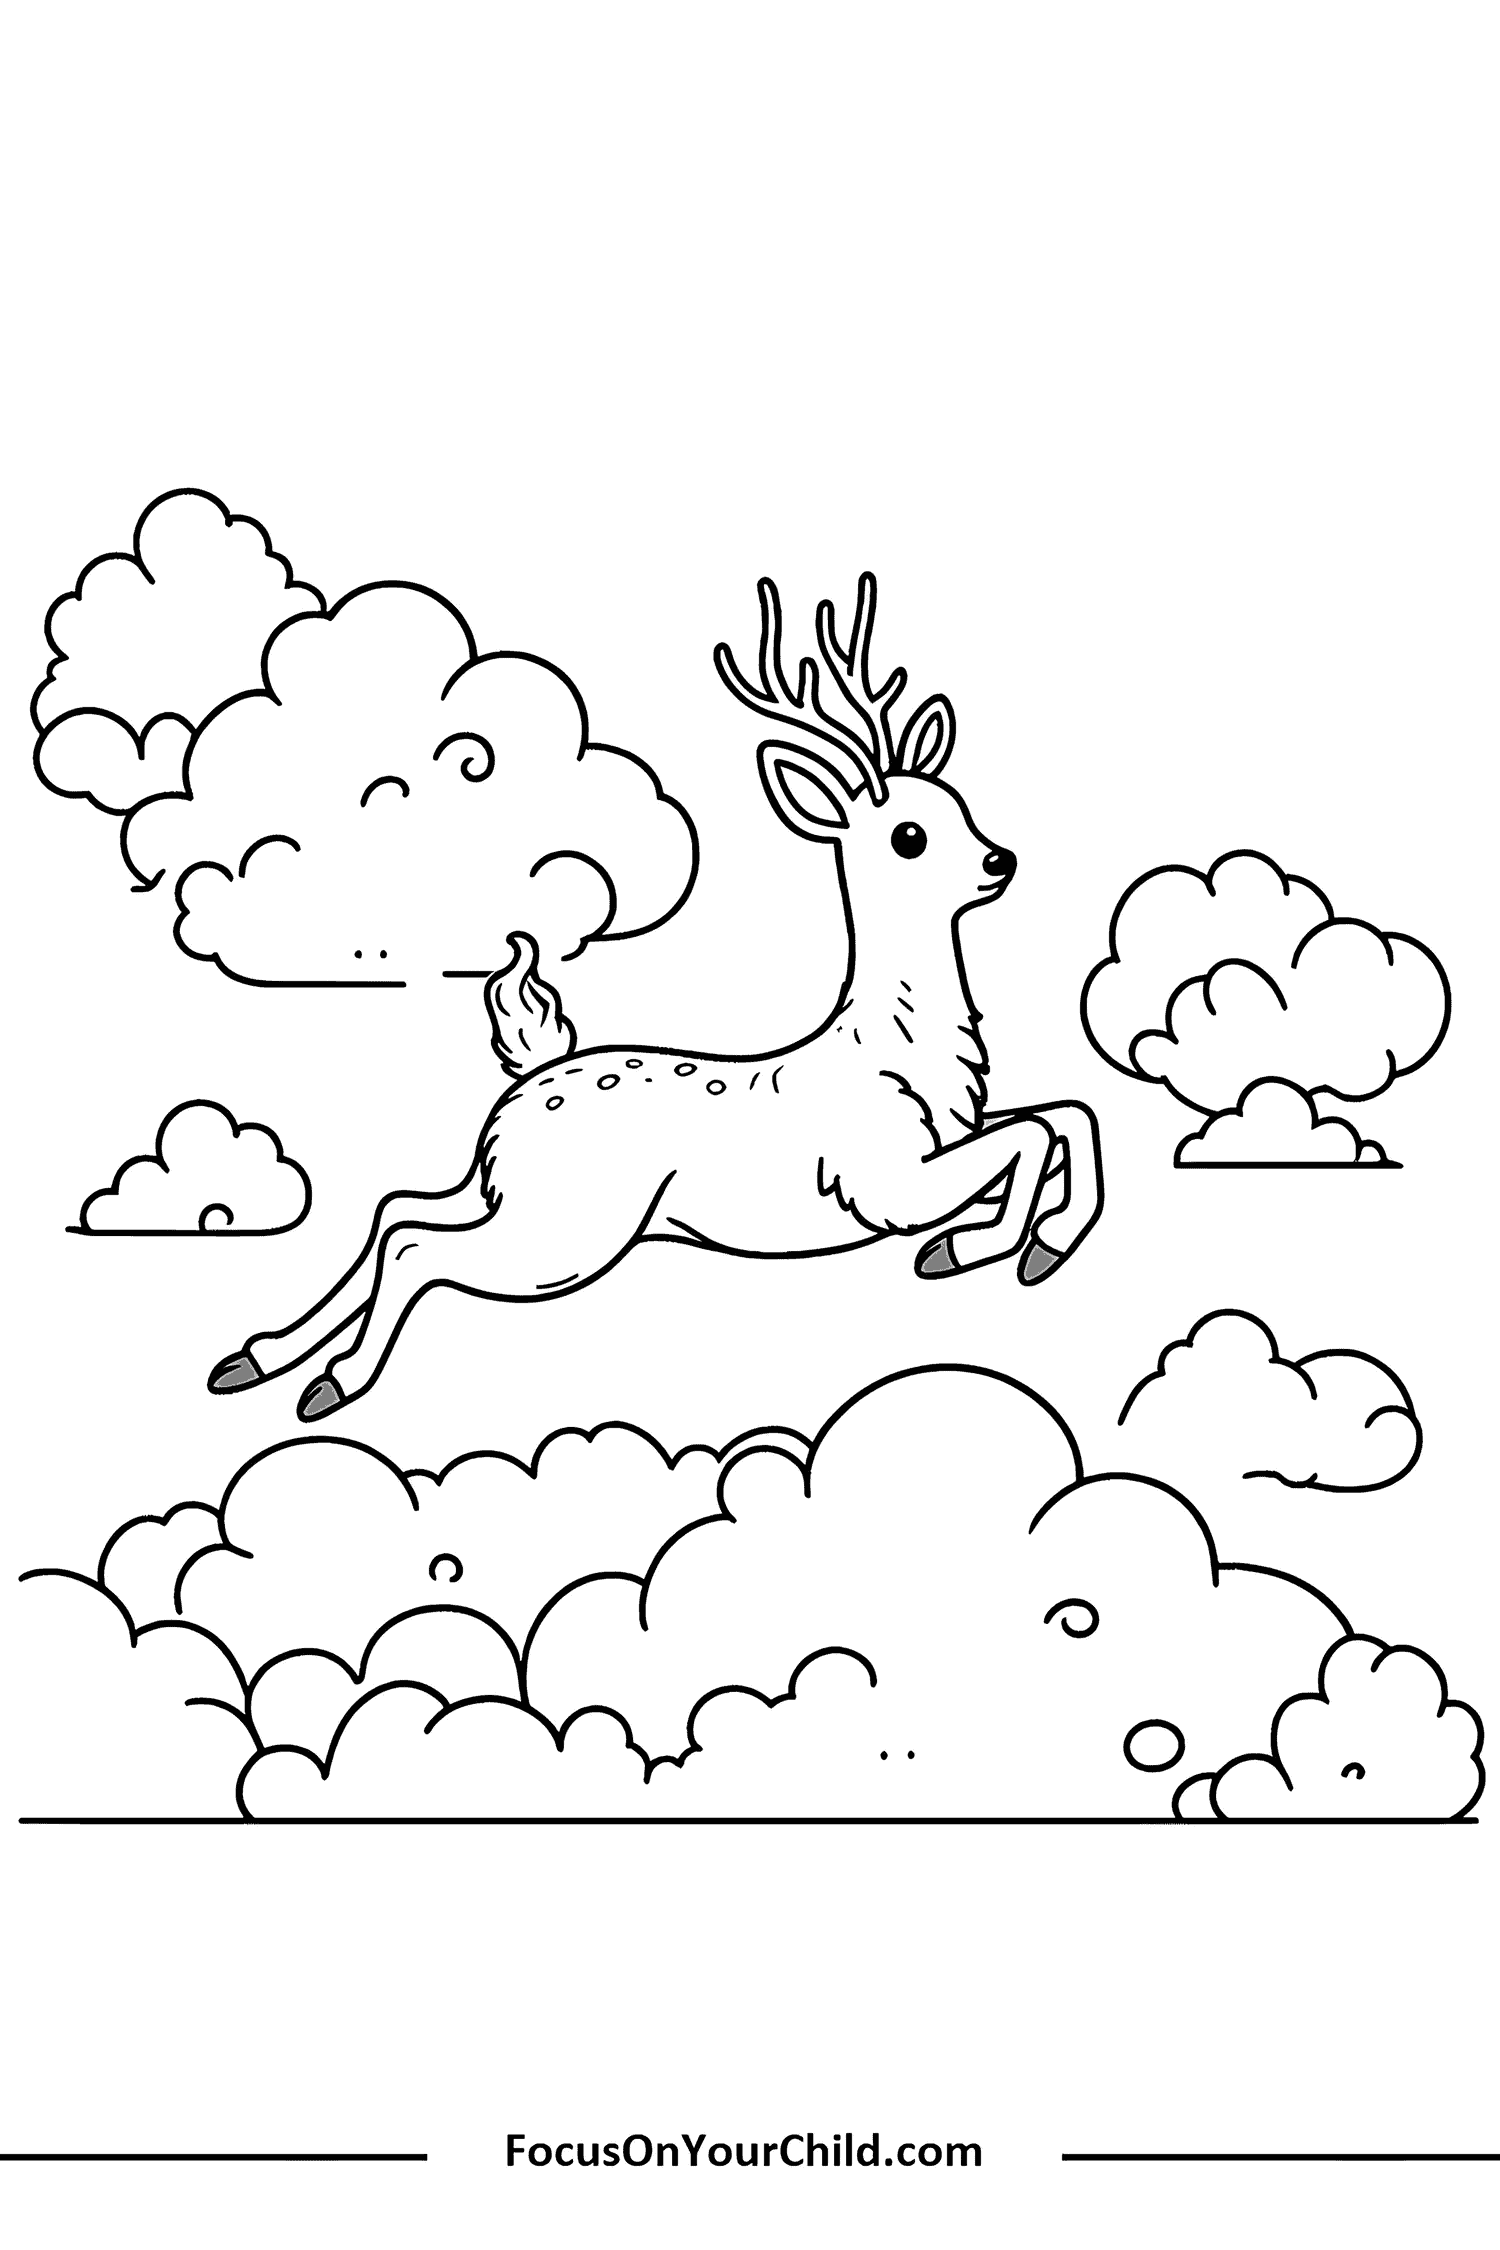 Whimsical deer leaping in the clouds for coloring activities on FocusOnYourChild.com.